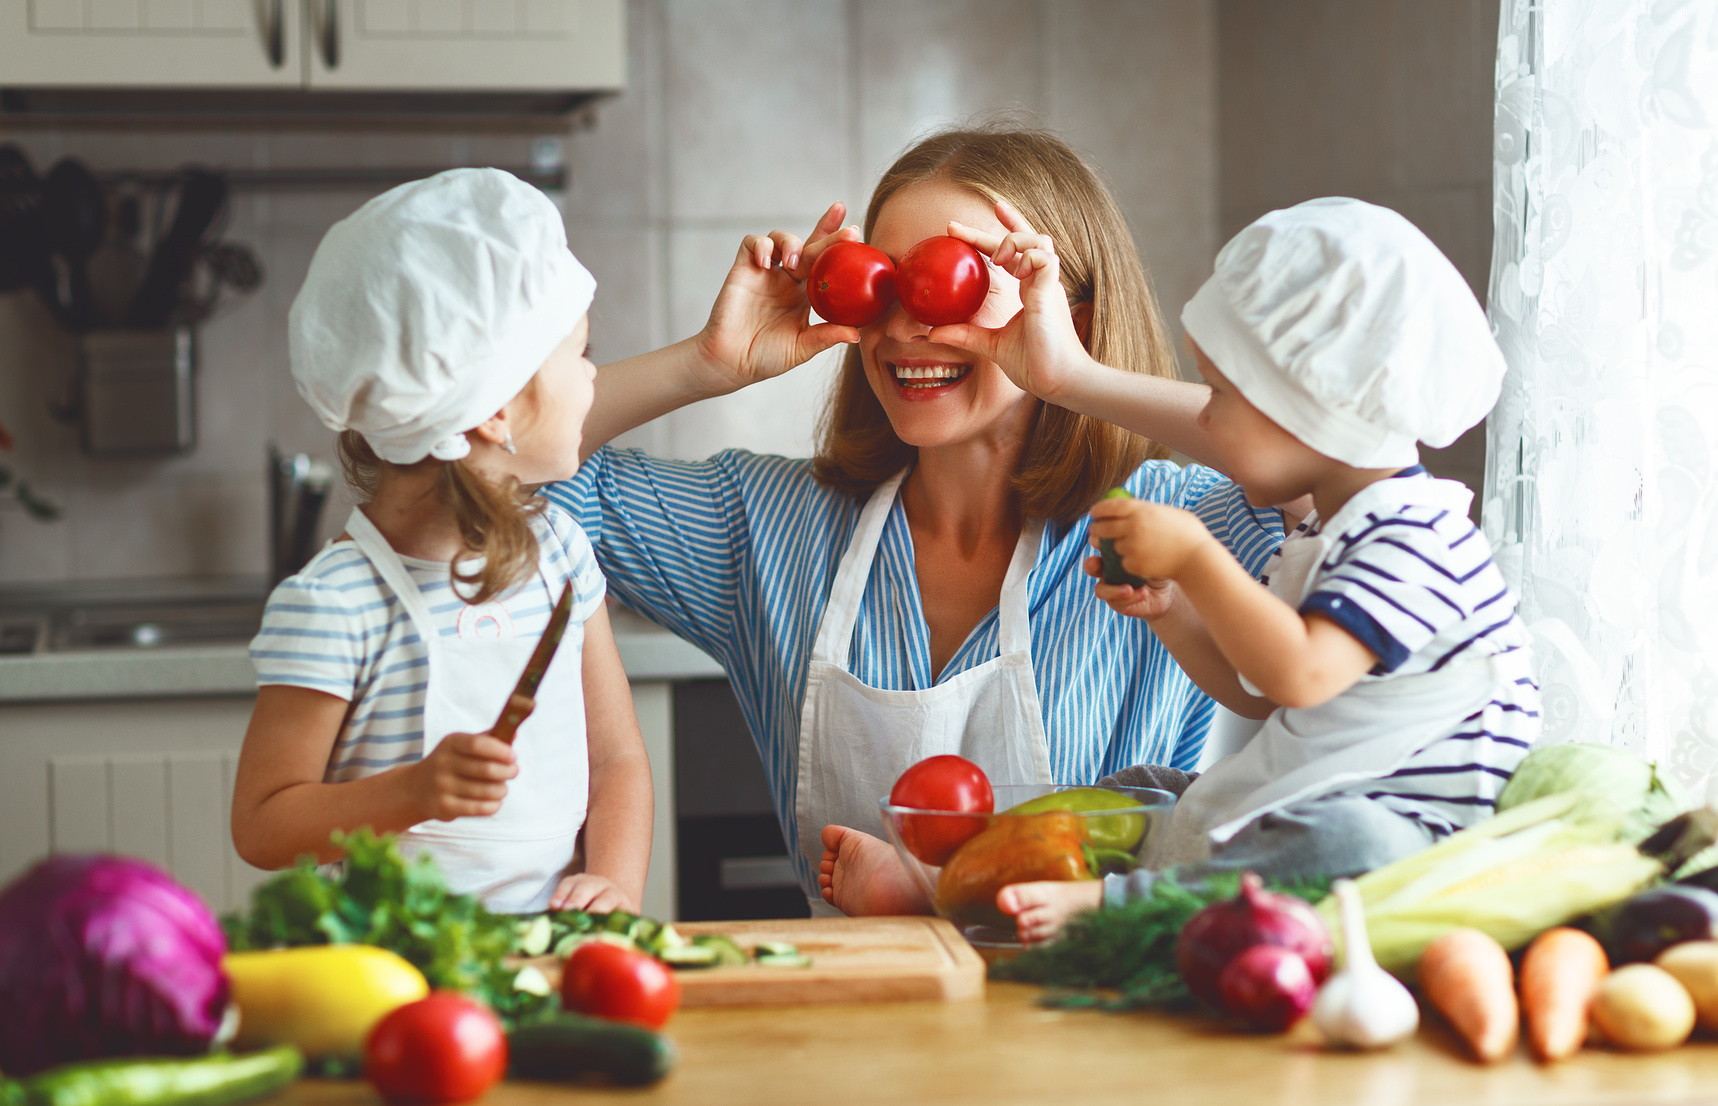 Healthy eating. Happy family mother and children prepares  vegetable salad